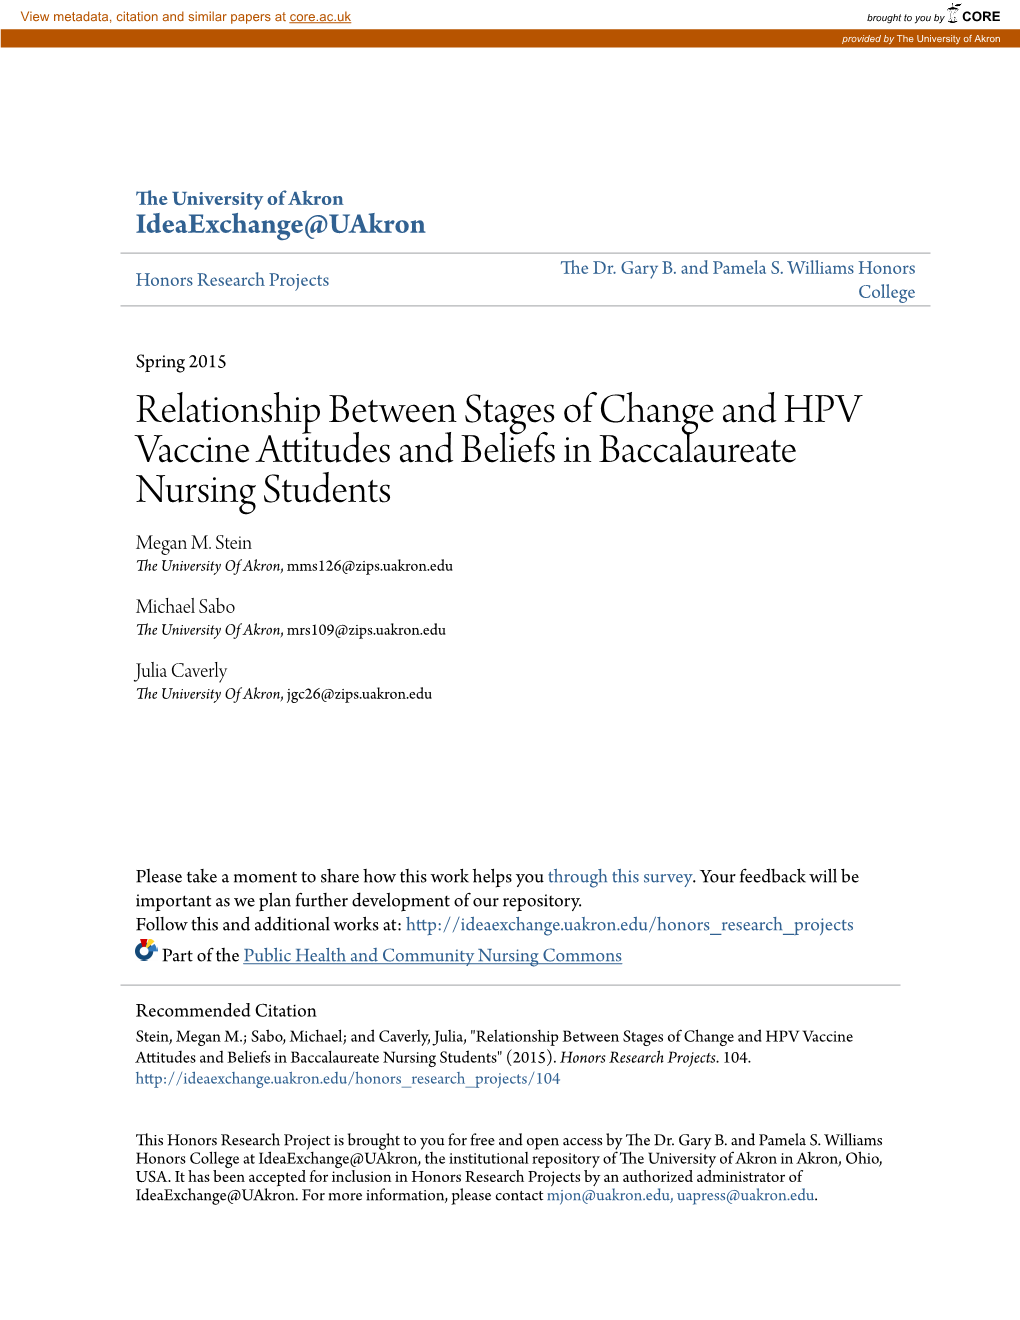 Relationship Between Stages of Change and HPV Vaccine Attitudes and Beliefs in Baccalaureate Nursing Students Megan M